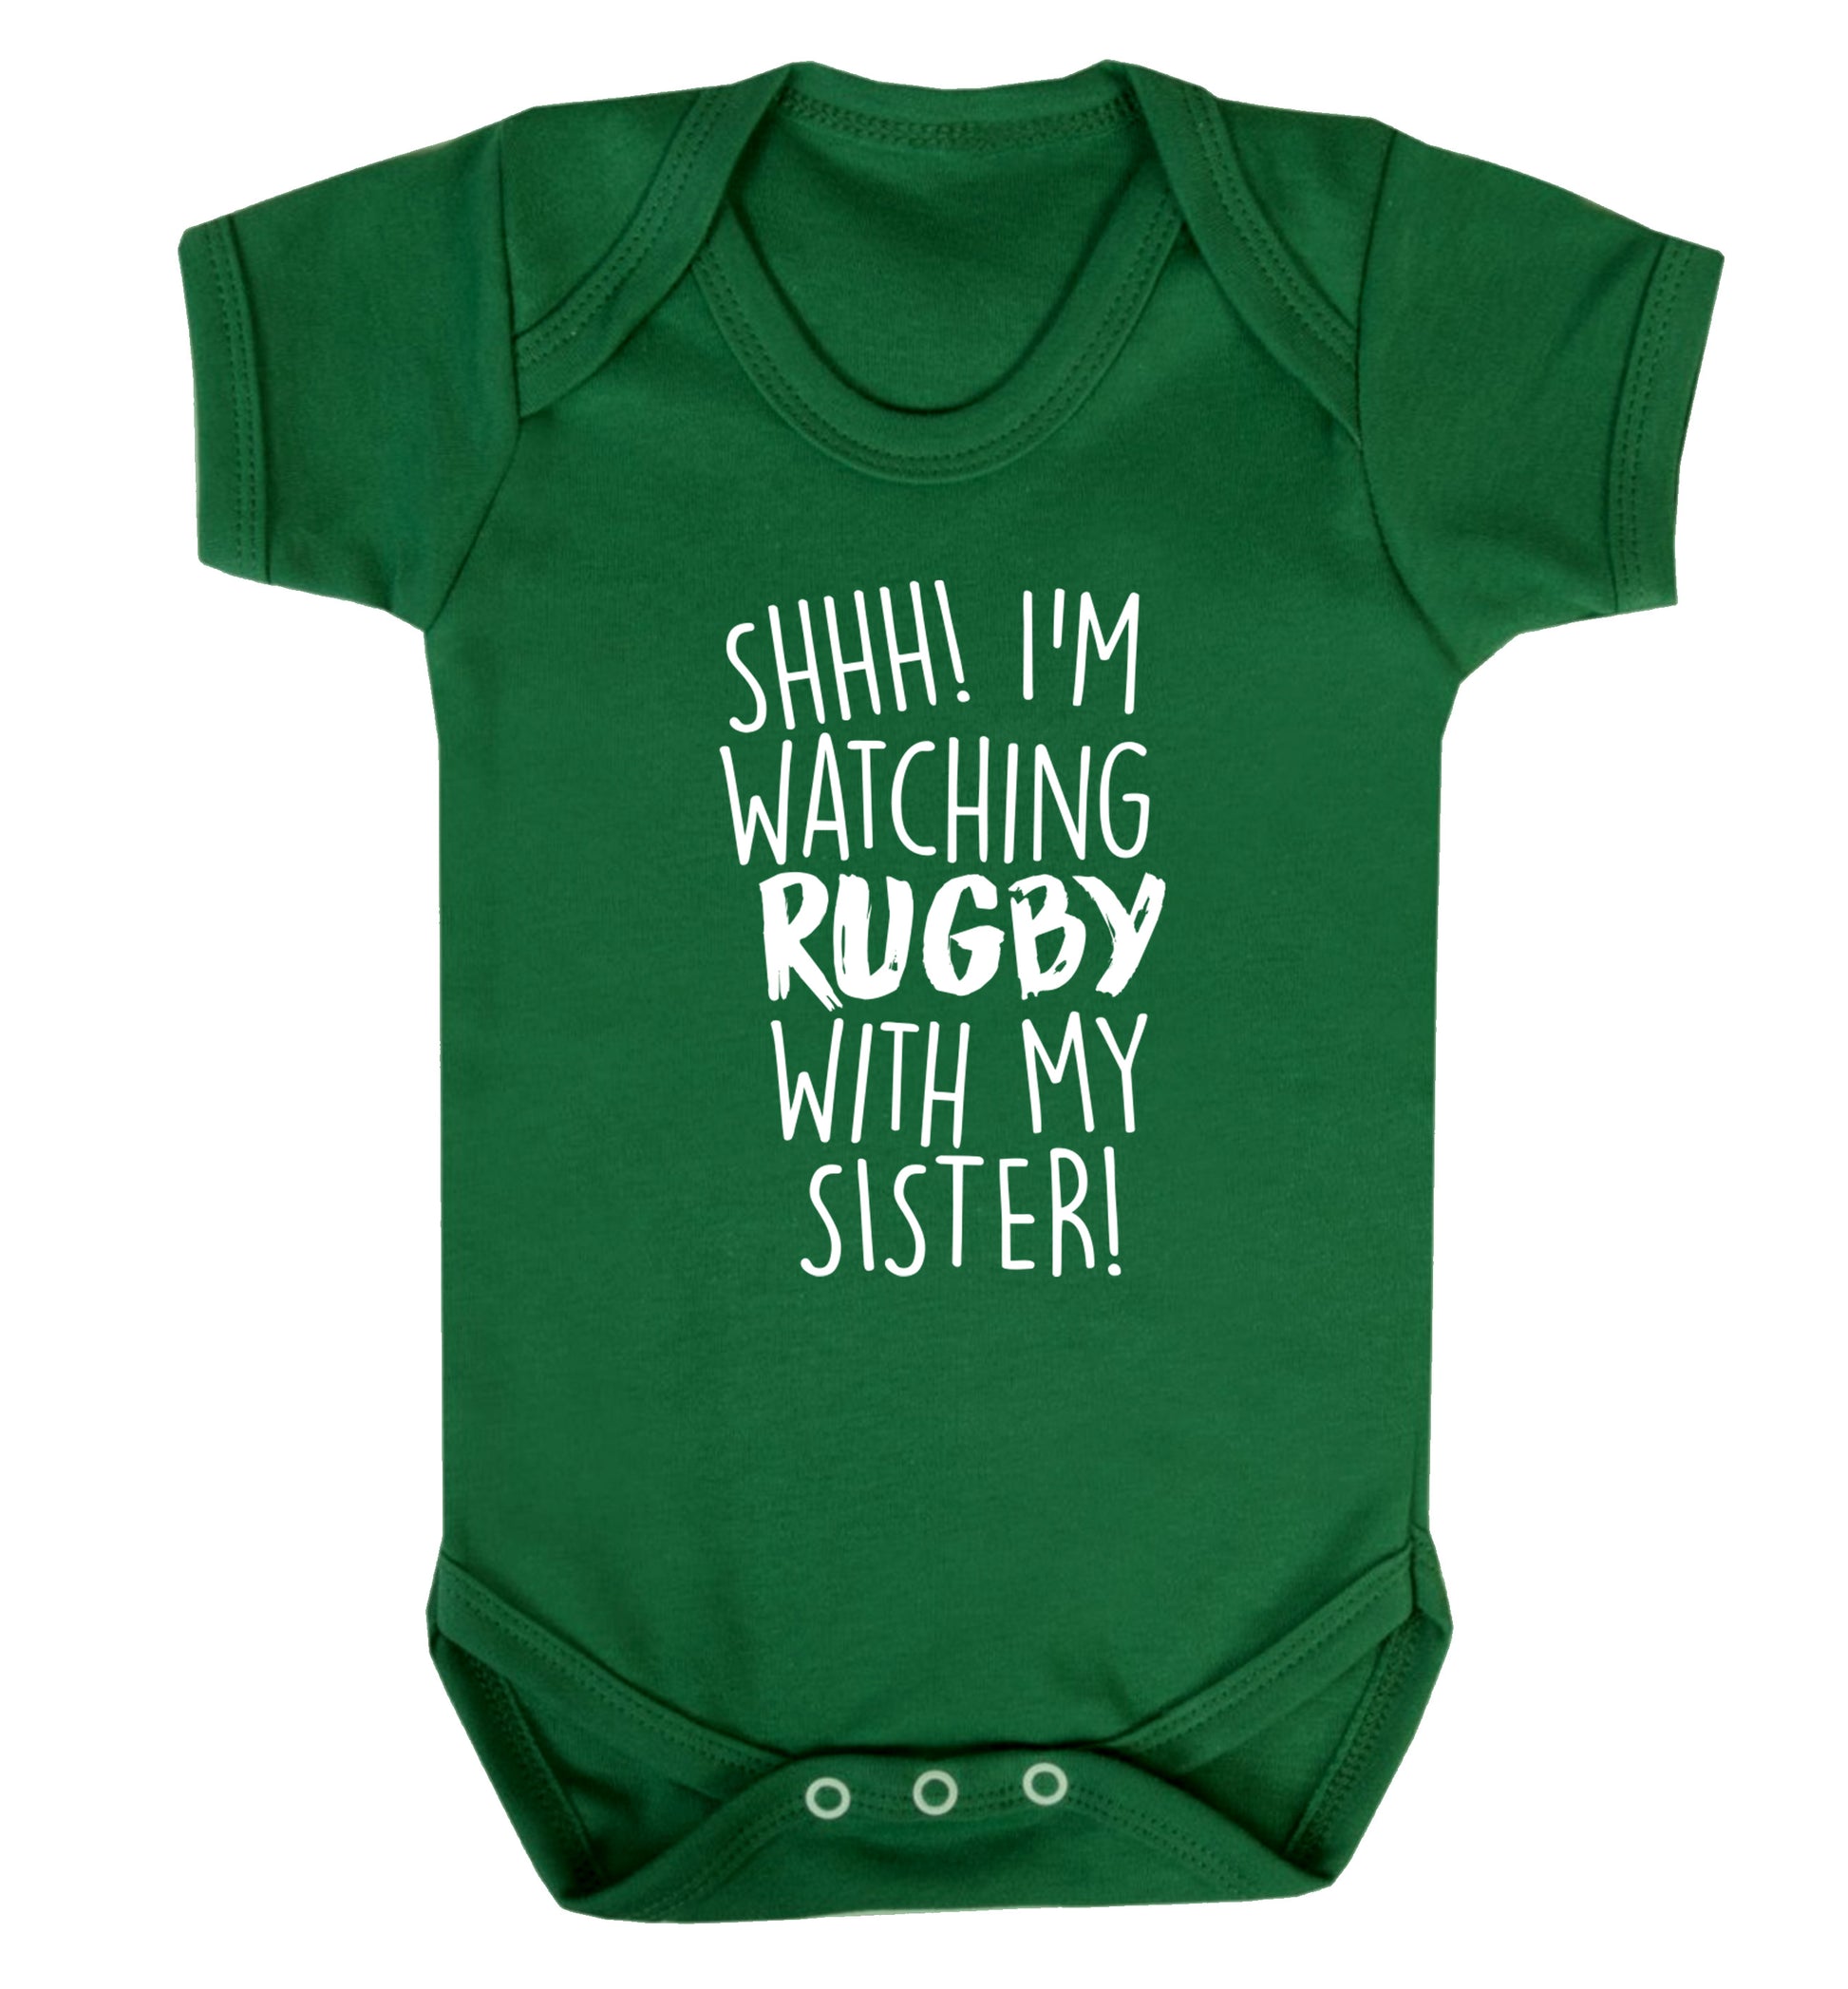 Shh... I'm watching rugby with my sister Baby Vest green 18-24 months